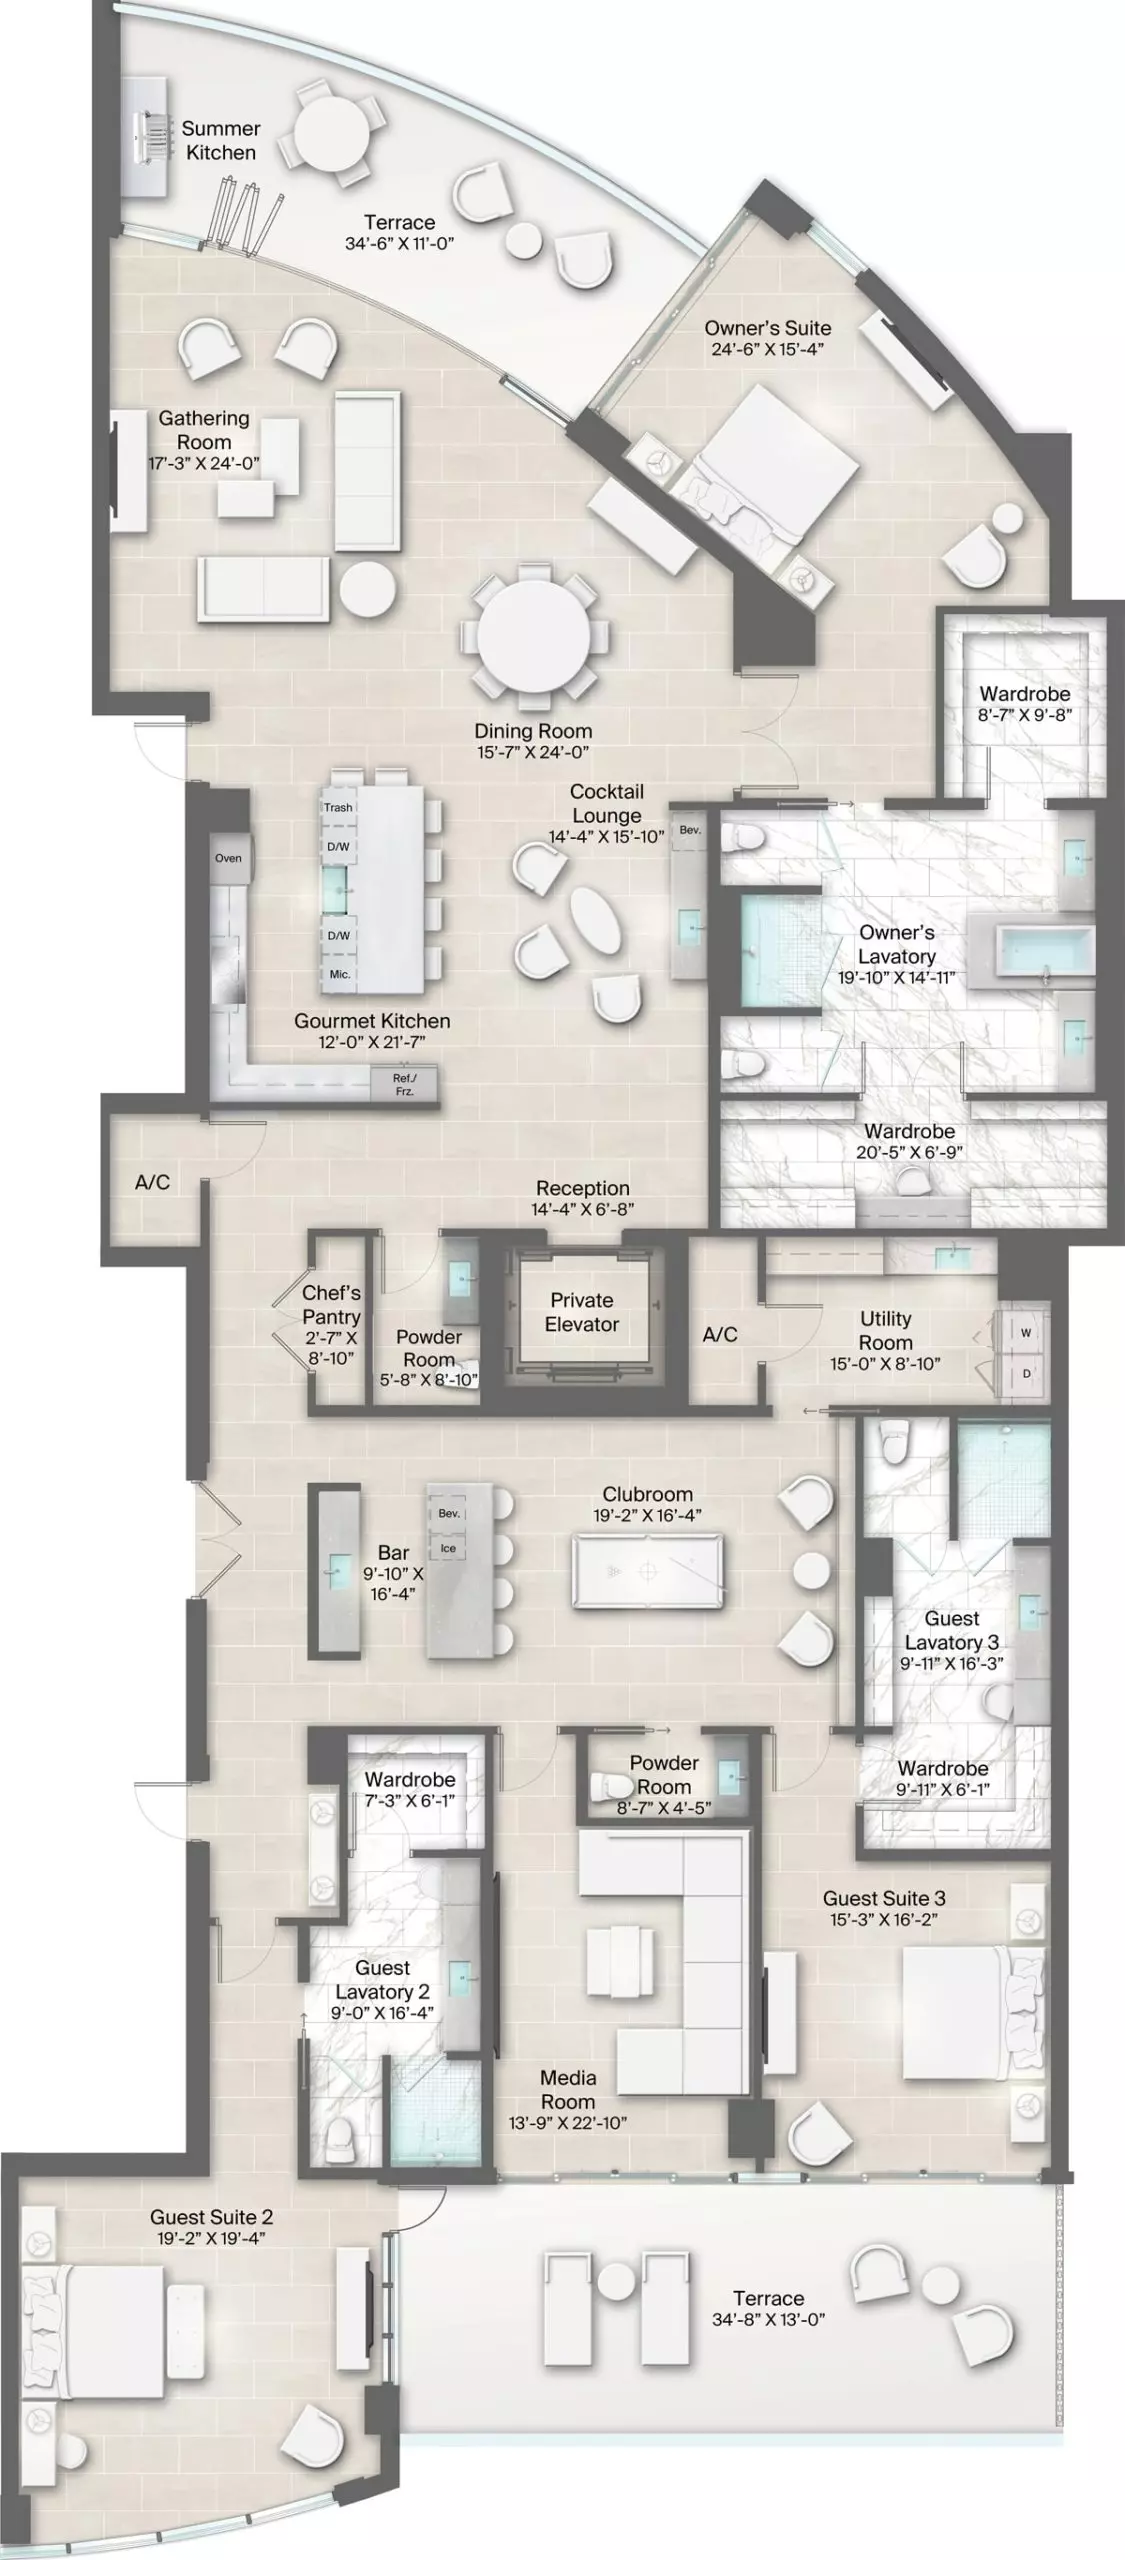 Armand Building, Plan 2 Floorplan includes 3 bedrooms, 3.5 baths and 2 terraces one looking North and the other South. 